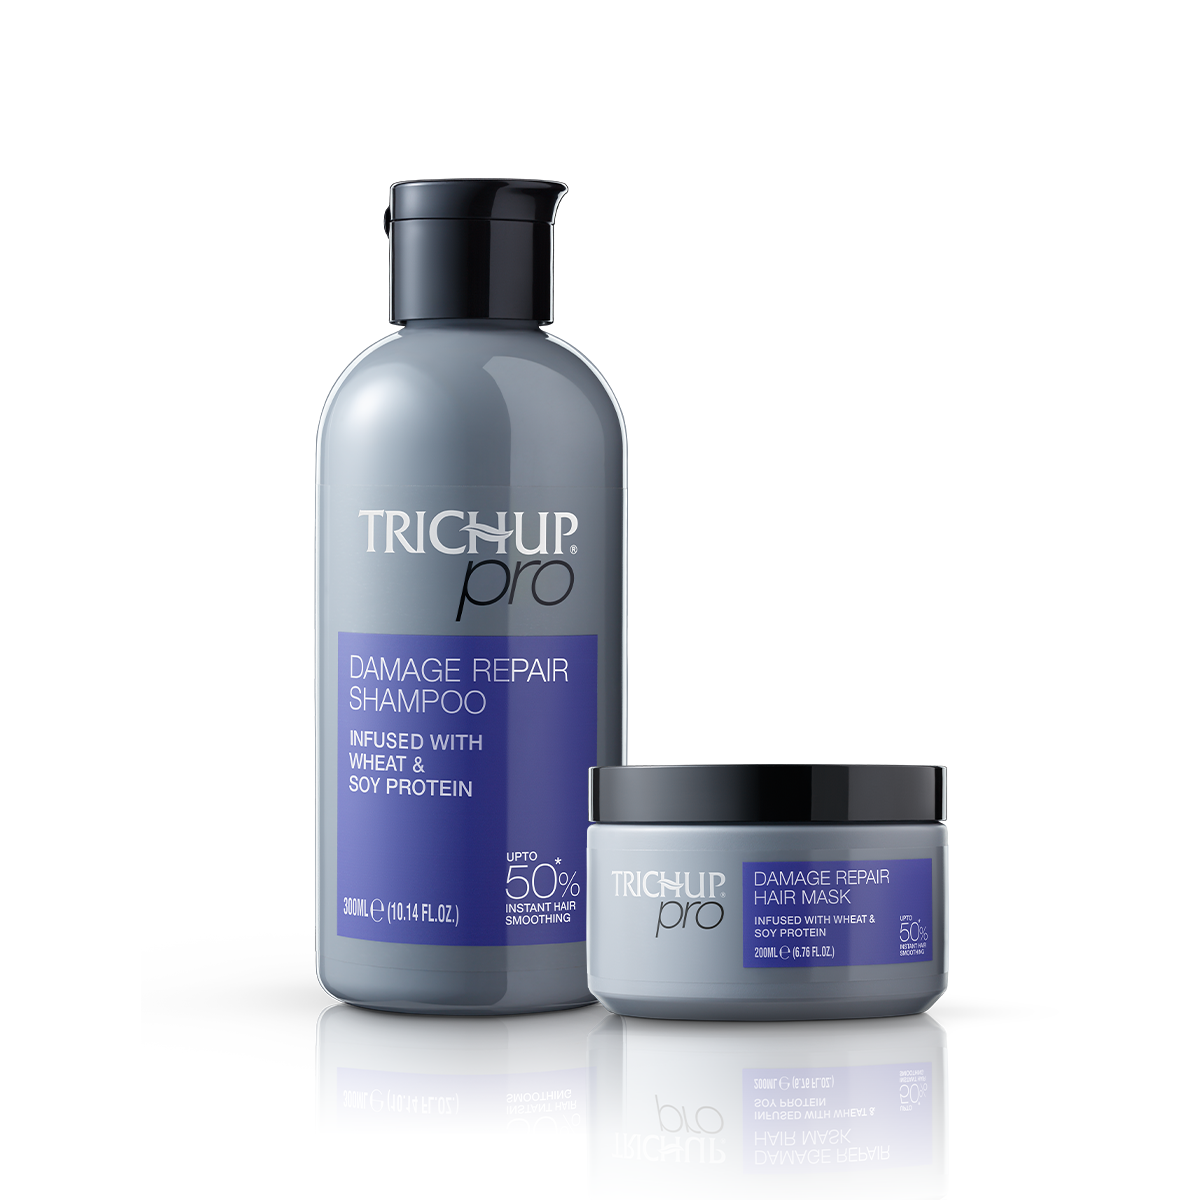 Trichup Pro Damage Repair & Instant Smoothing Hair Care Combo for Dry Frizzy Hair (Set of 2) - Shampoo 300 ml + Hair Mask 200 ml | Improves Texture & Manageability | Reduce Split Ends & Dryness